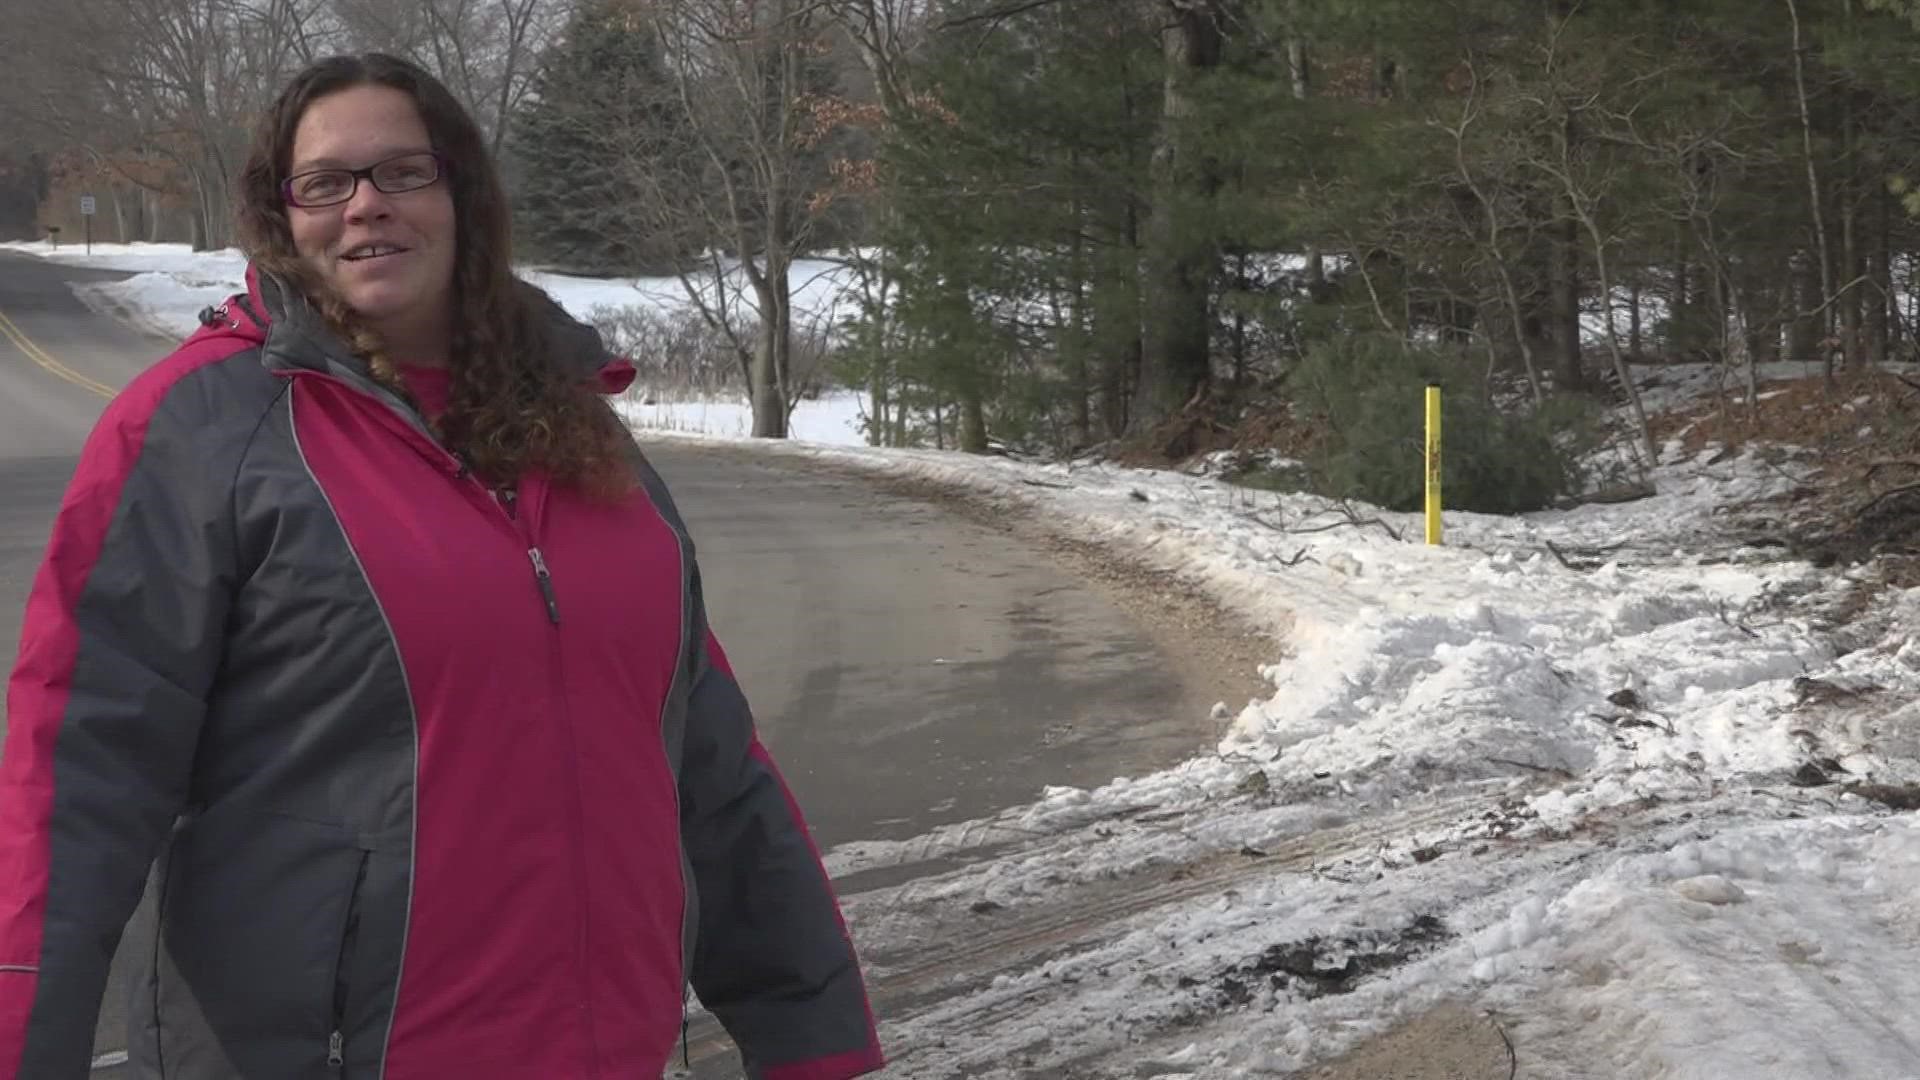 Stefani Mock was driving home from babysitting when she saw a red truck slam into a tree and catch fire in Muskegon County.